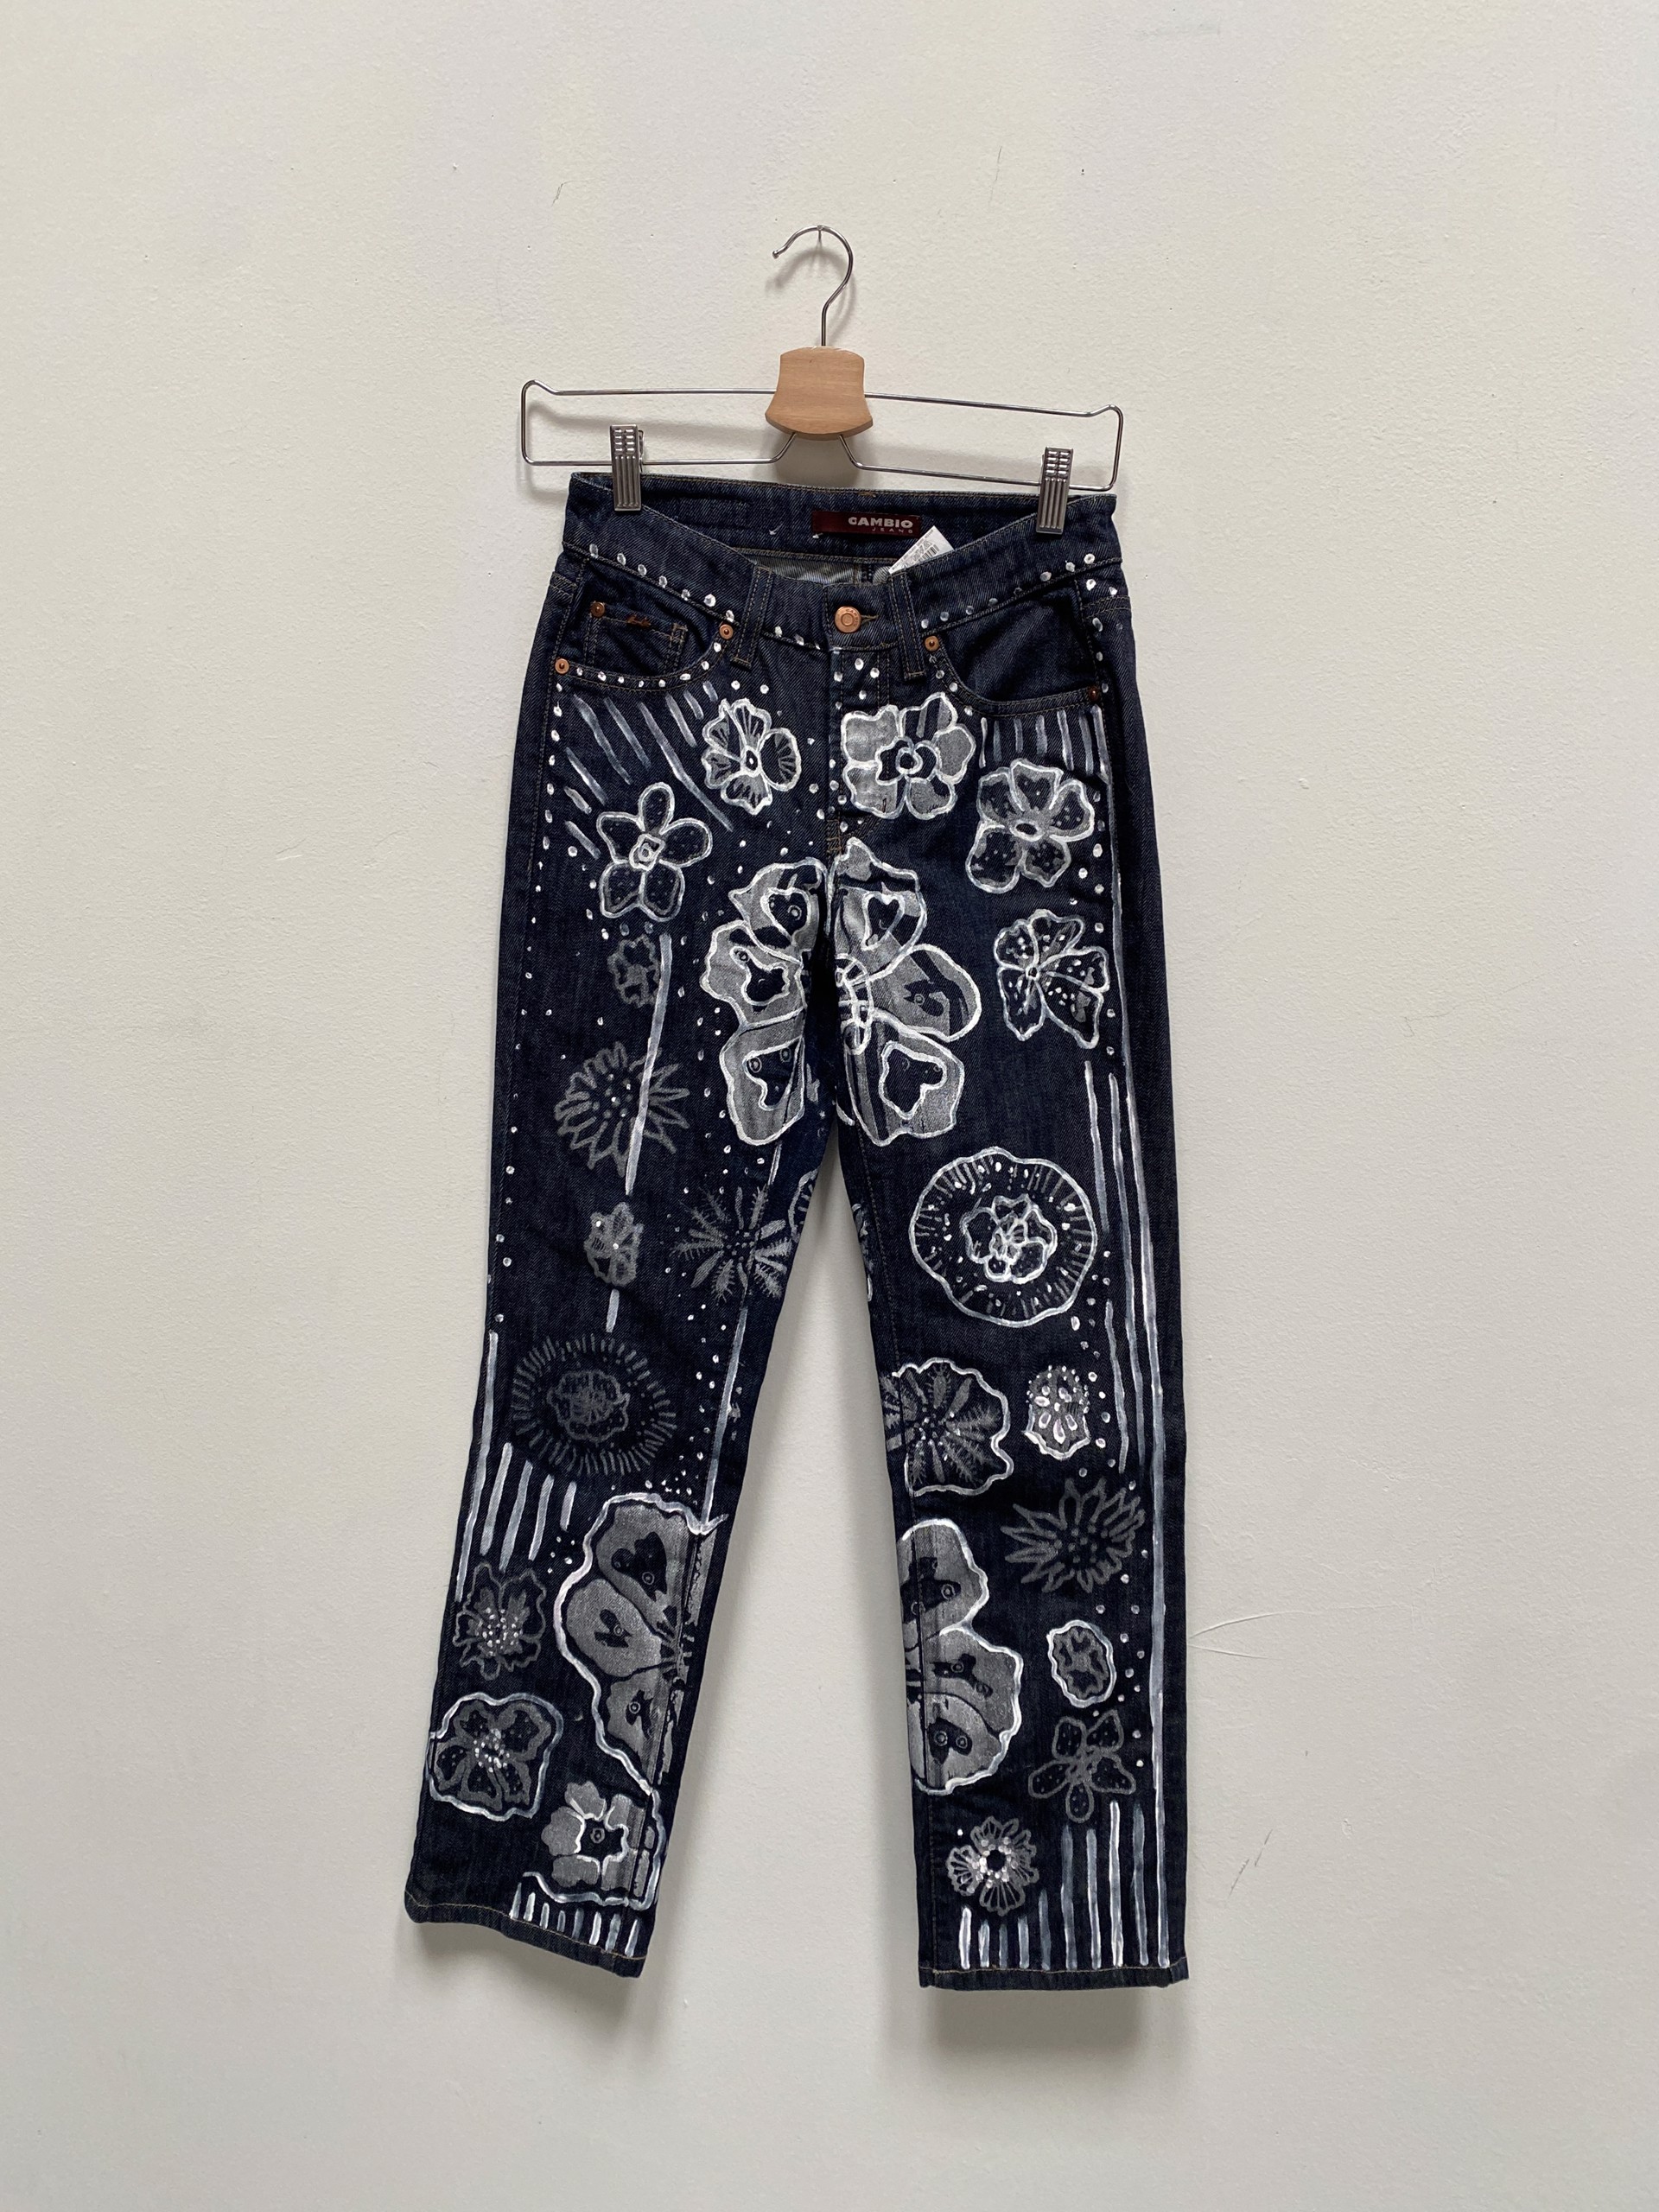 Silver Flowers on Navy Jeans by Laurie Shapiro